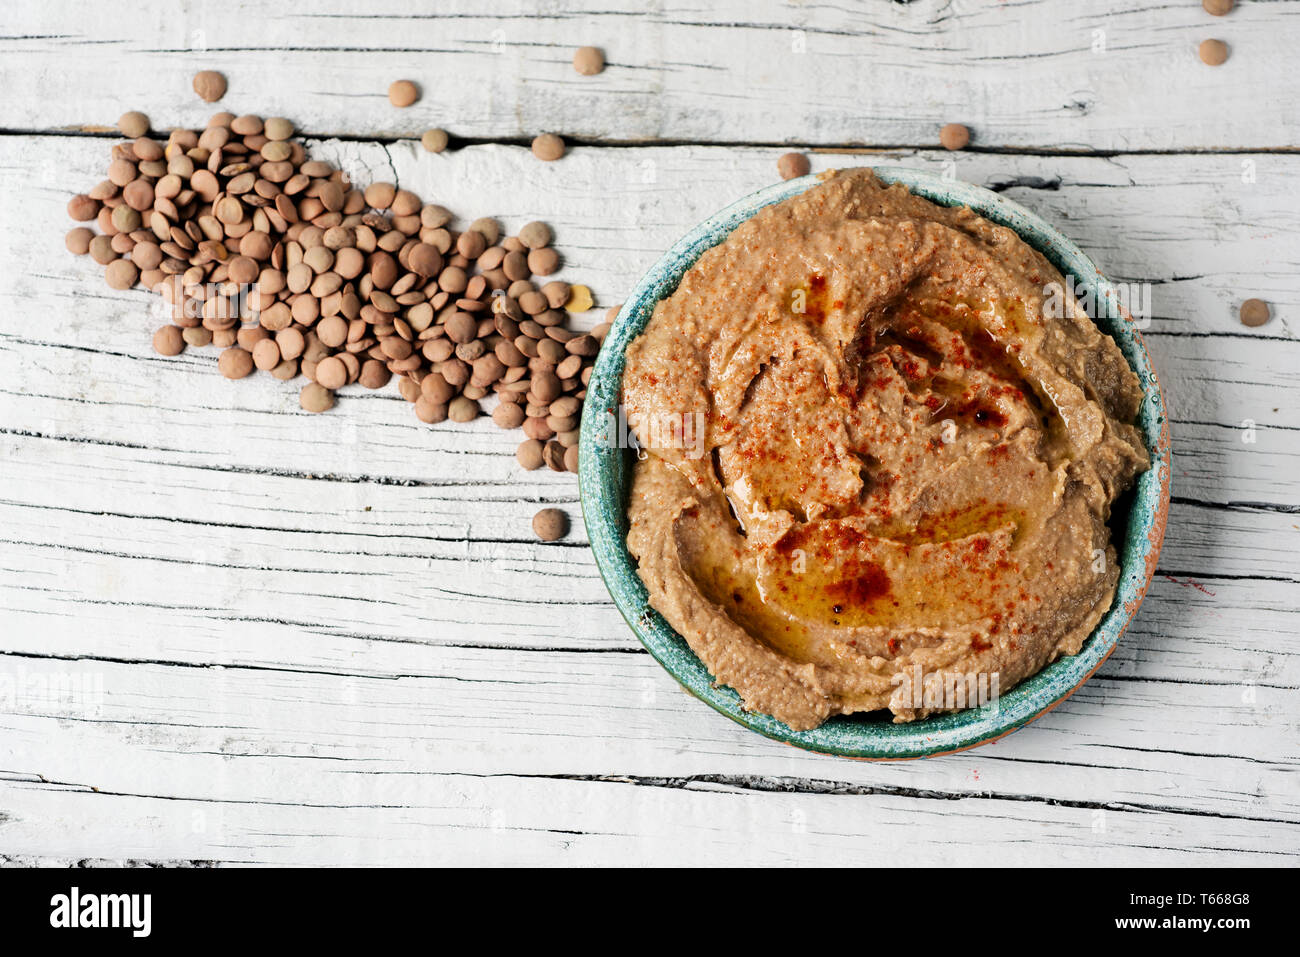 high angle view of a green ceramic plate with a homemade lentil hummus, seasoned with paprika, on a white rustic wooden table Stock Photo